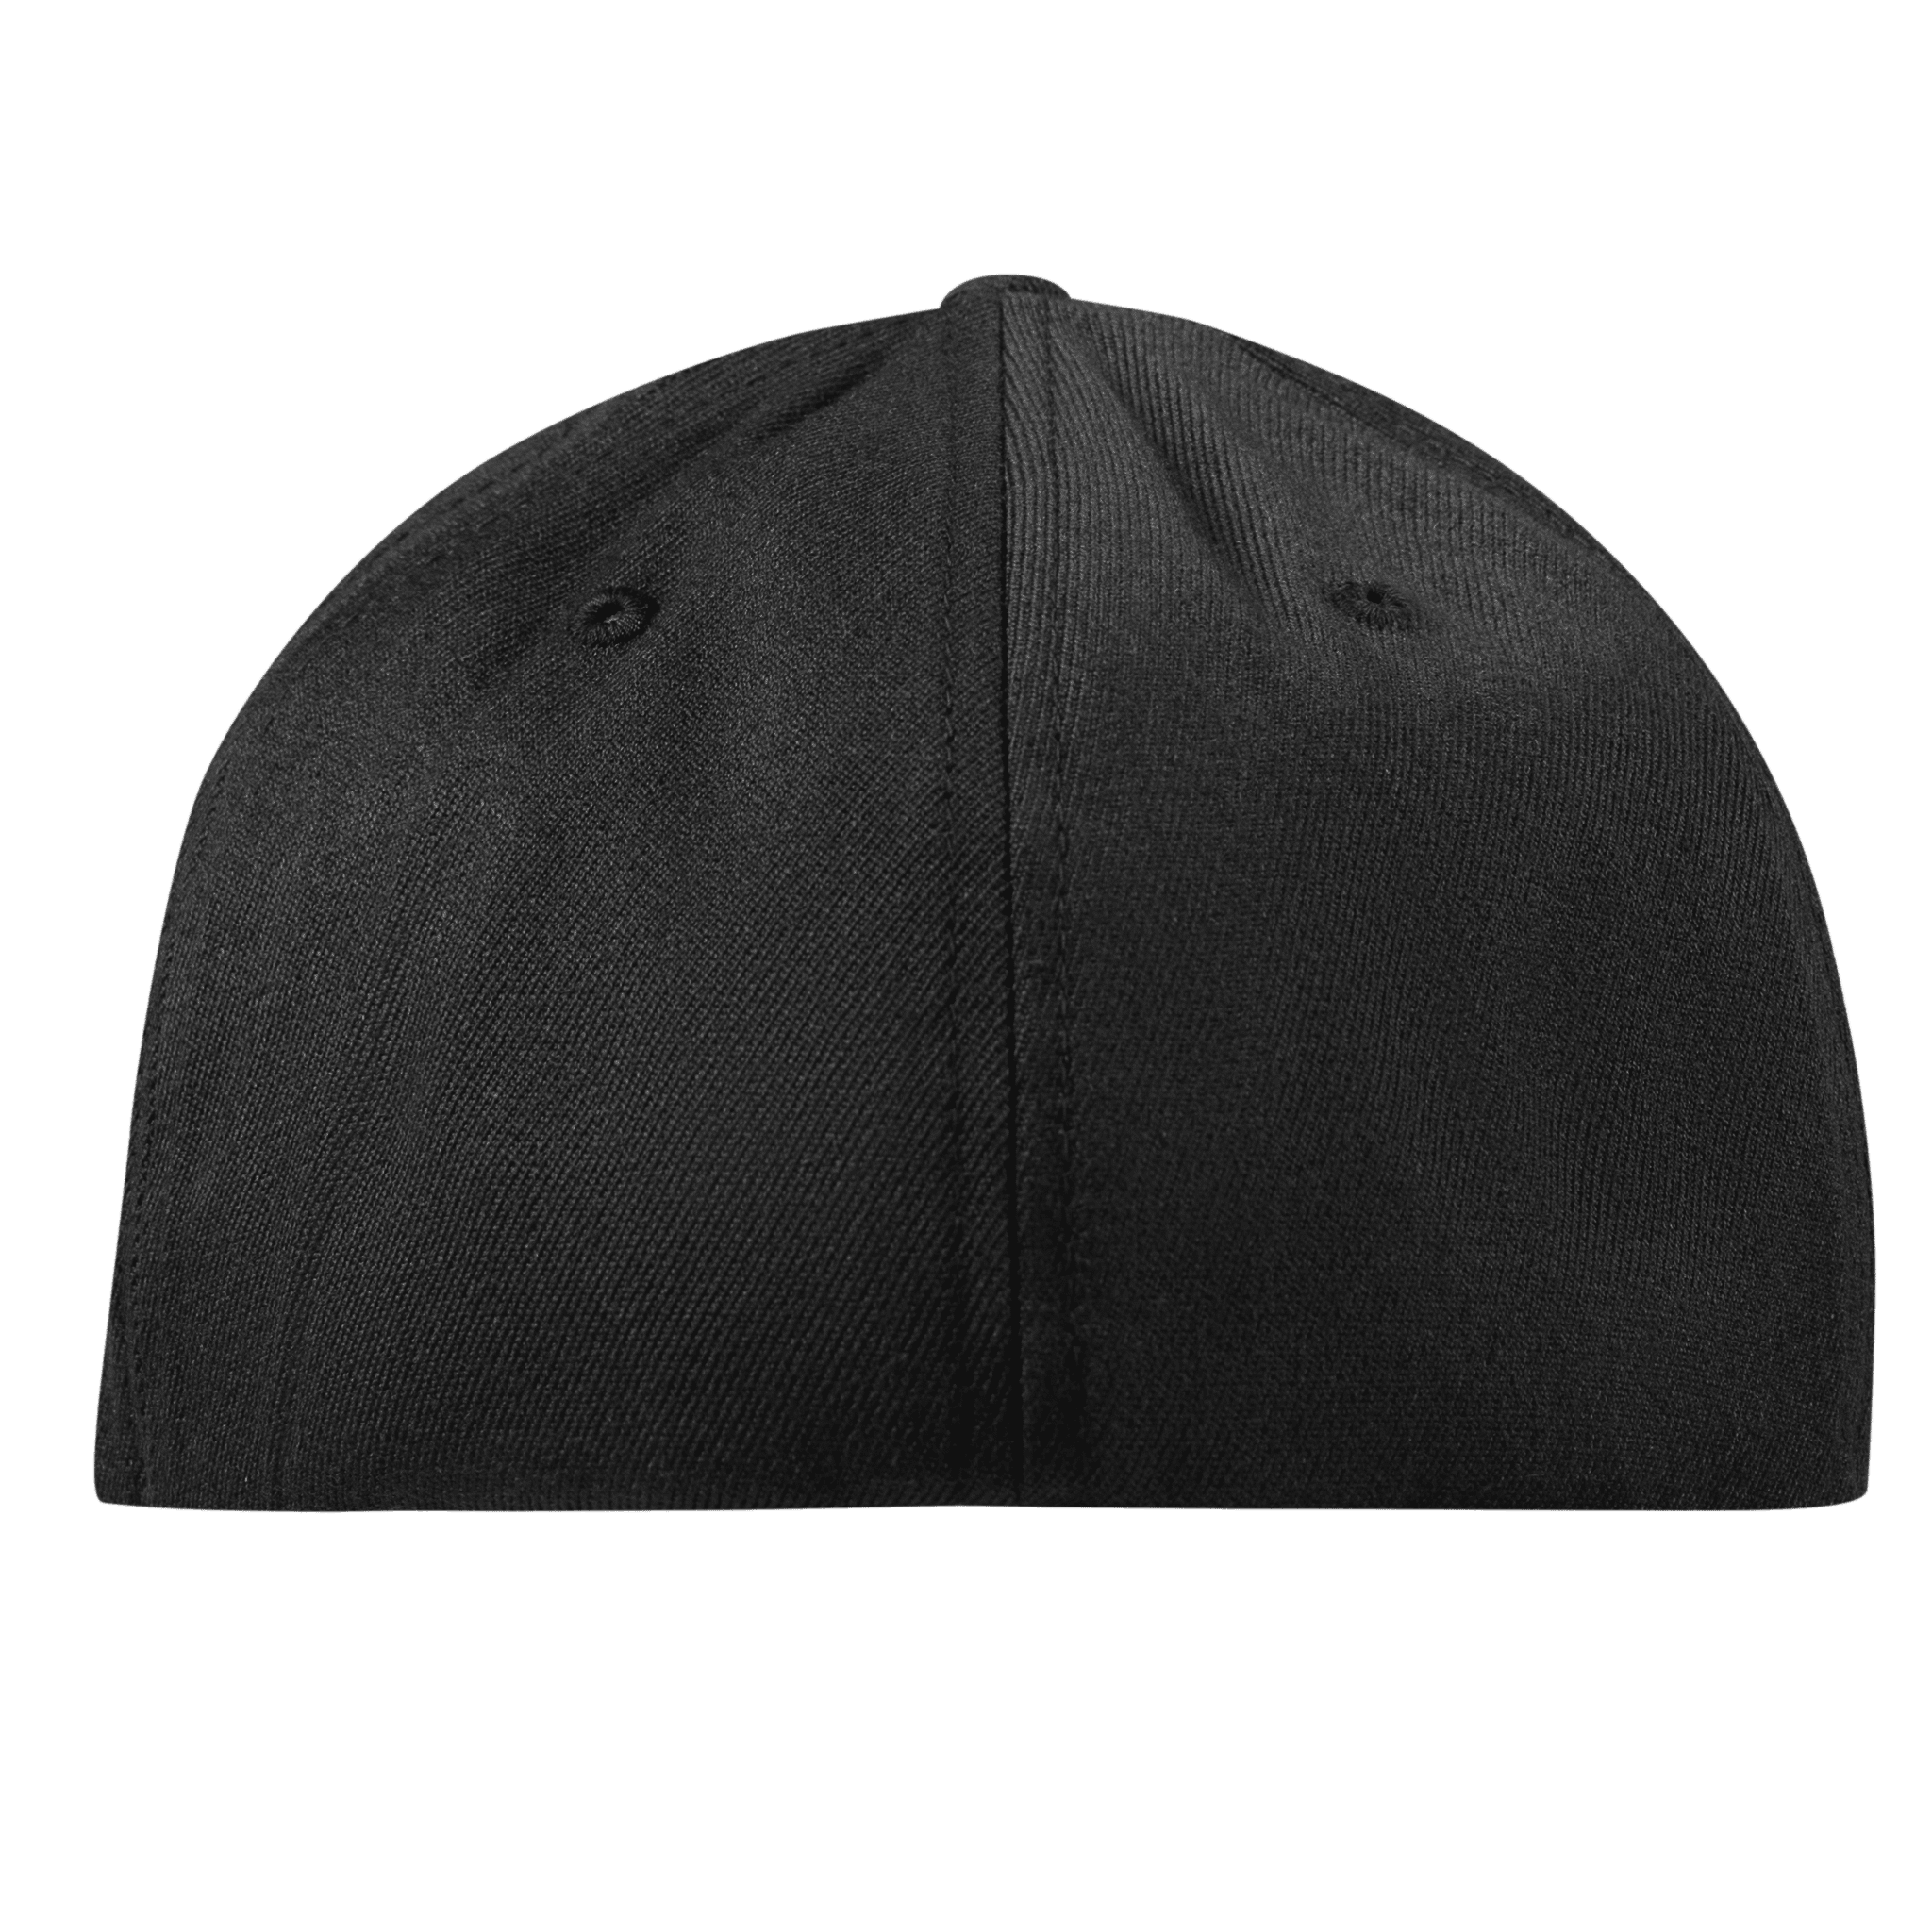 Indiana Compass Flexfit Fitted Back Black